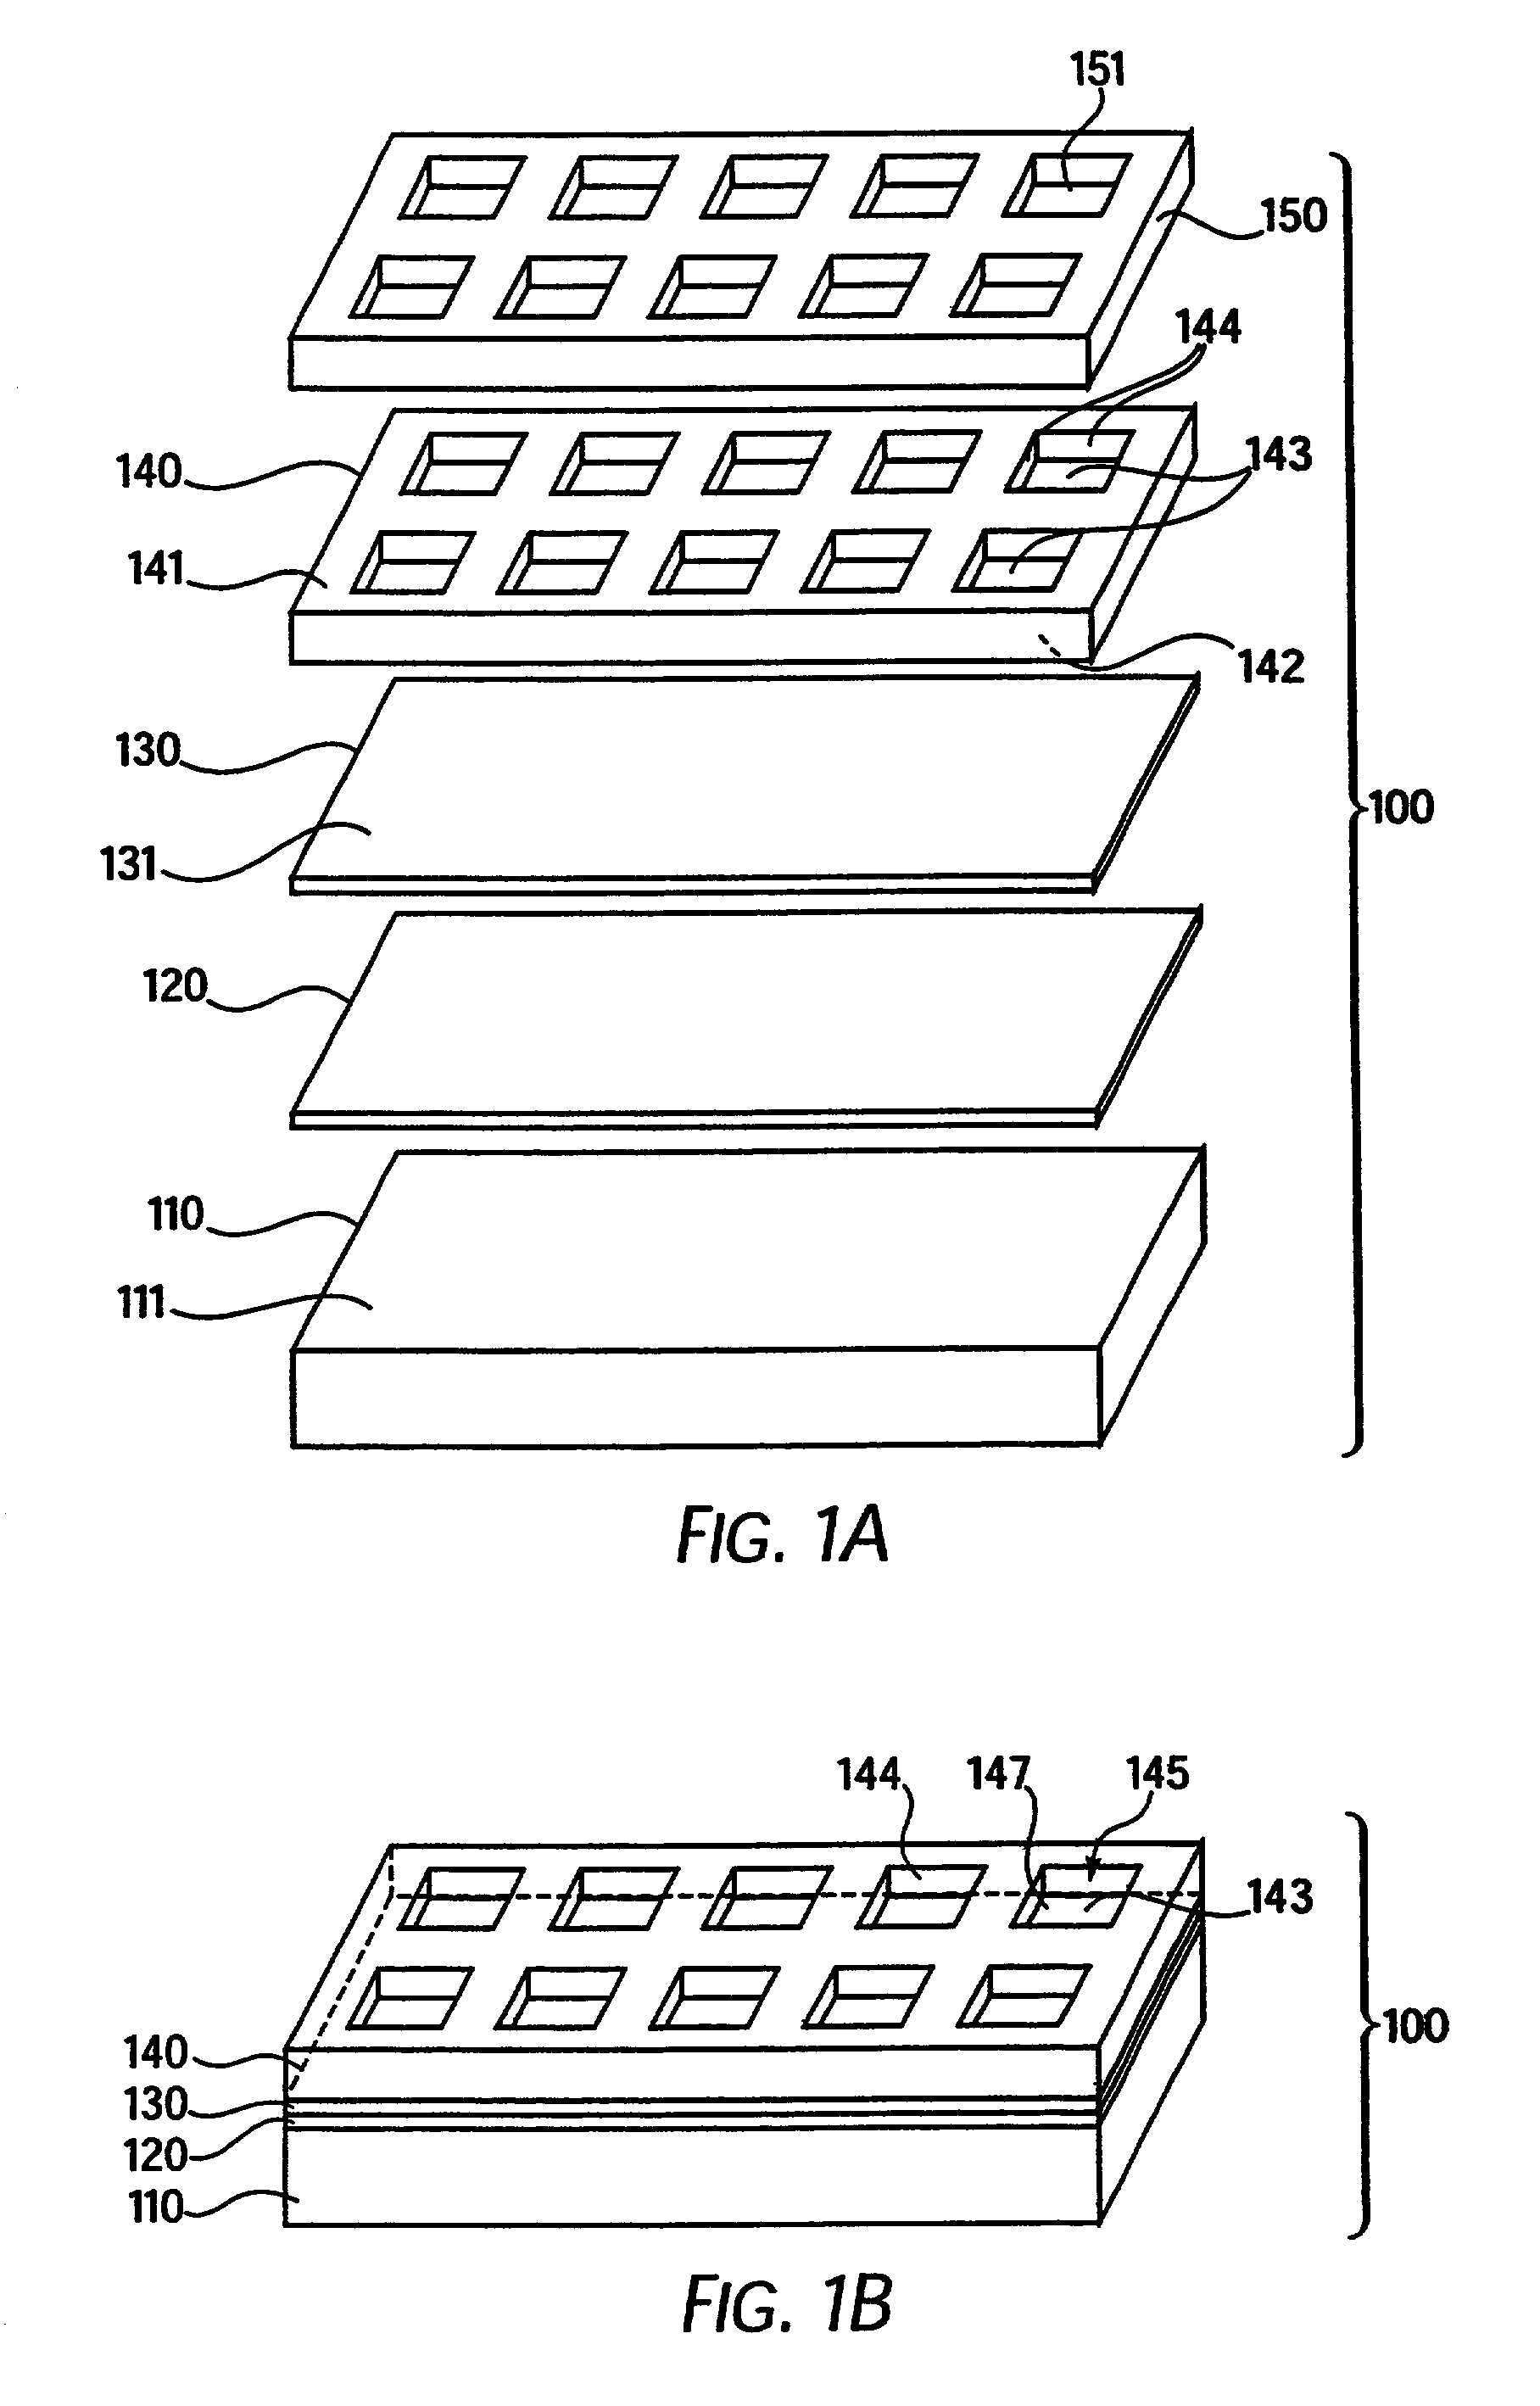 Methods of arraying biological materials using peelable and resealable devices